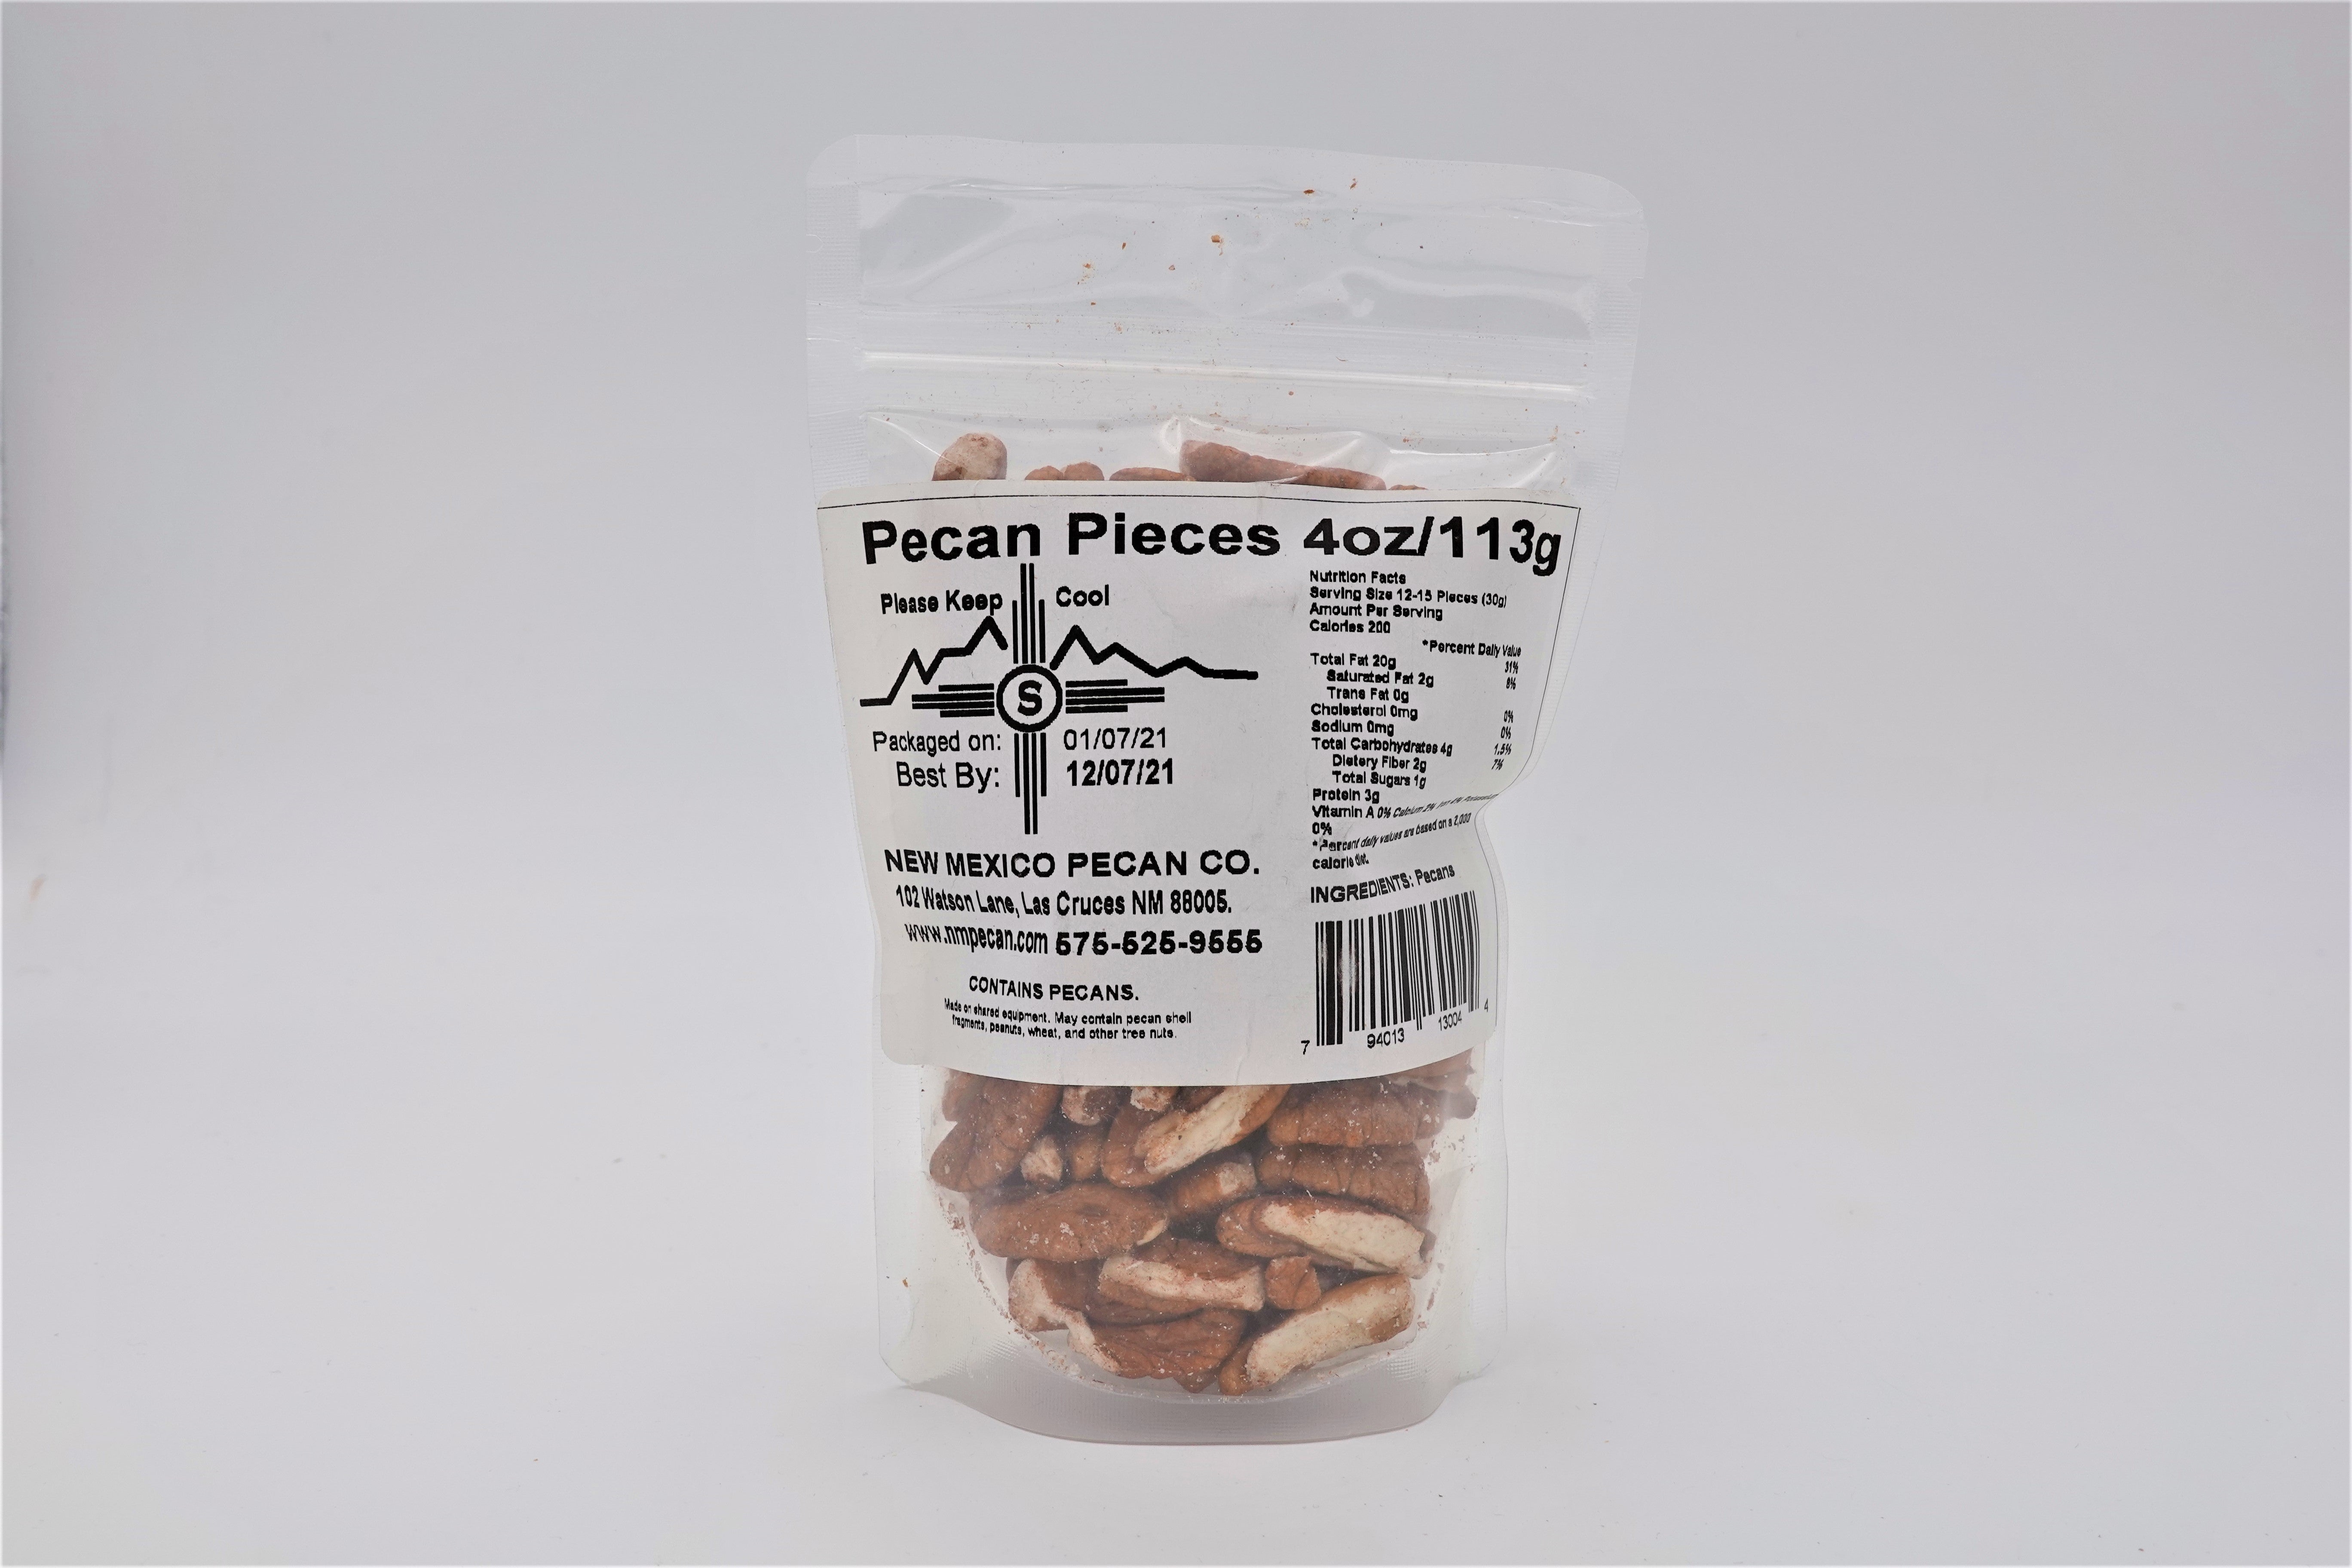 A clear plastic package of Pecan Pieces pecan pieces, labeled as 4 oz/113g, displays nutritional information with pecans visible behind the label, making it a perfect